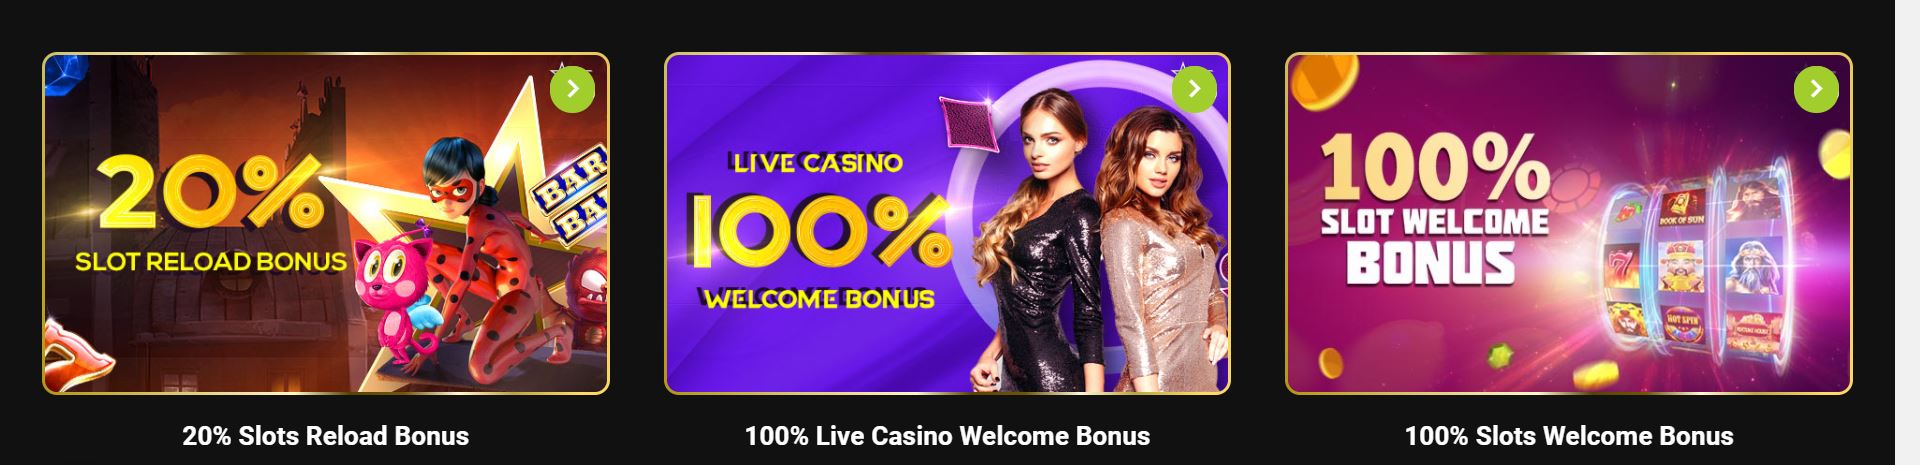 Jeetwin Asia Opinion Better Online casino games & Bonuses Examined